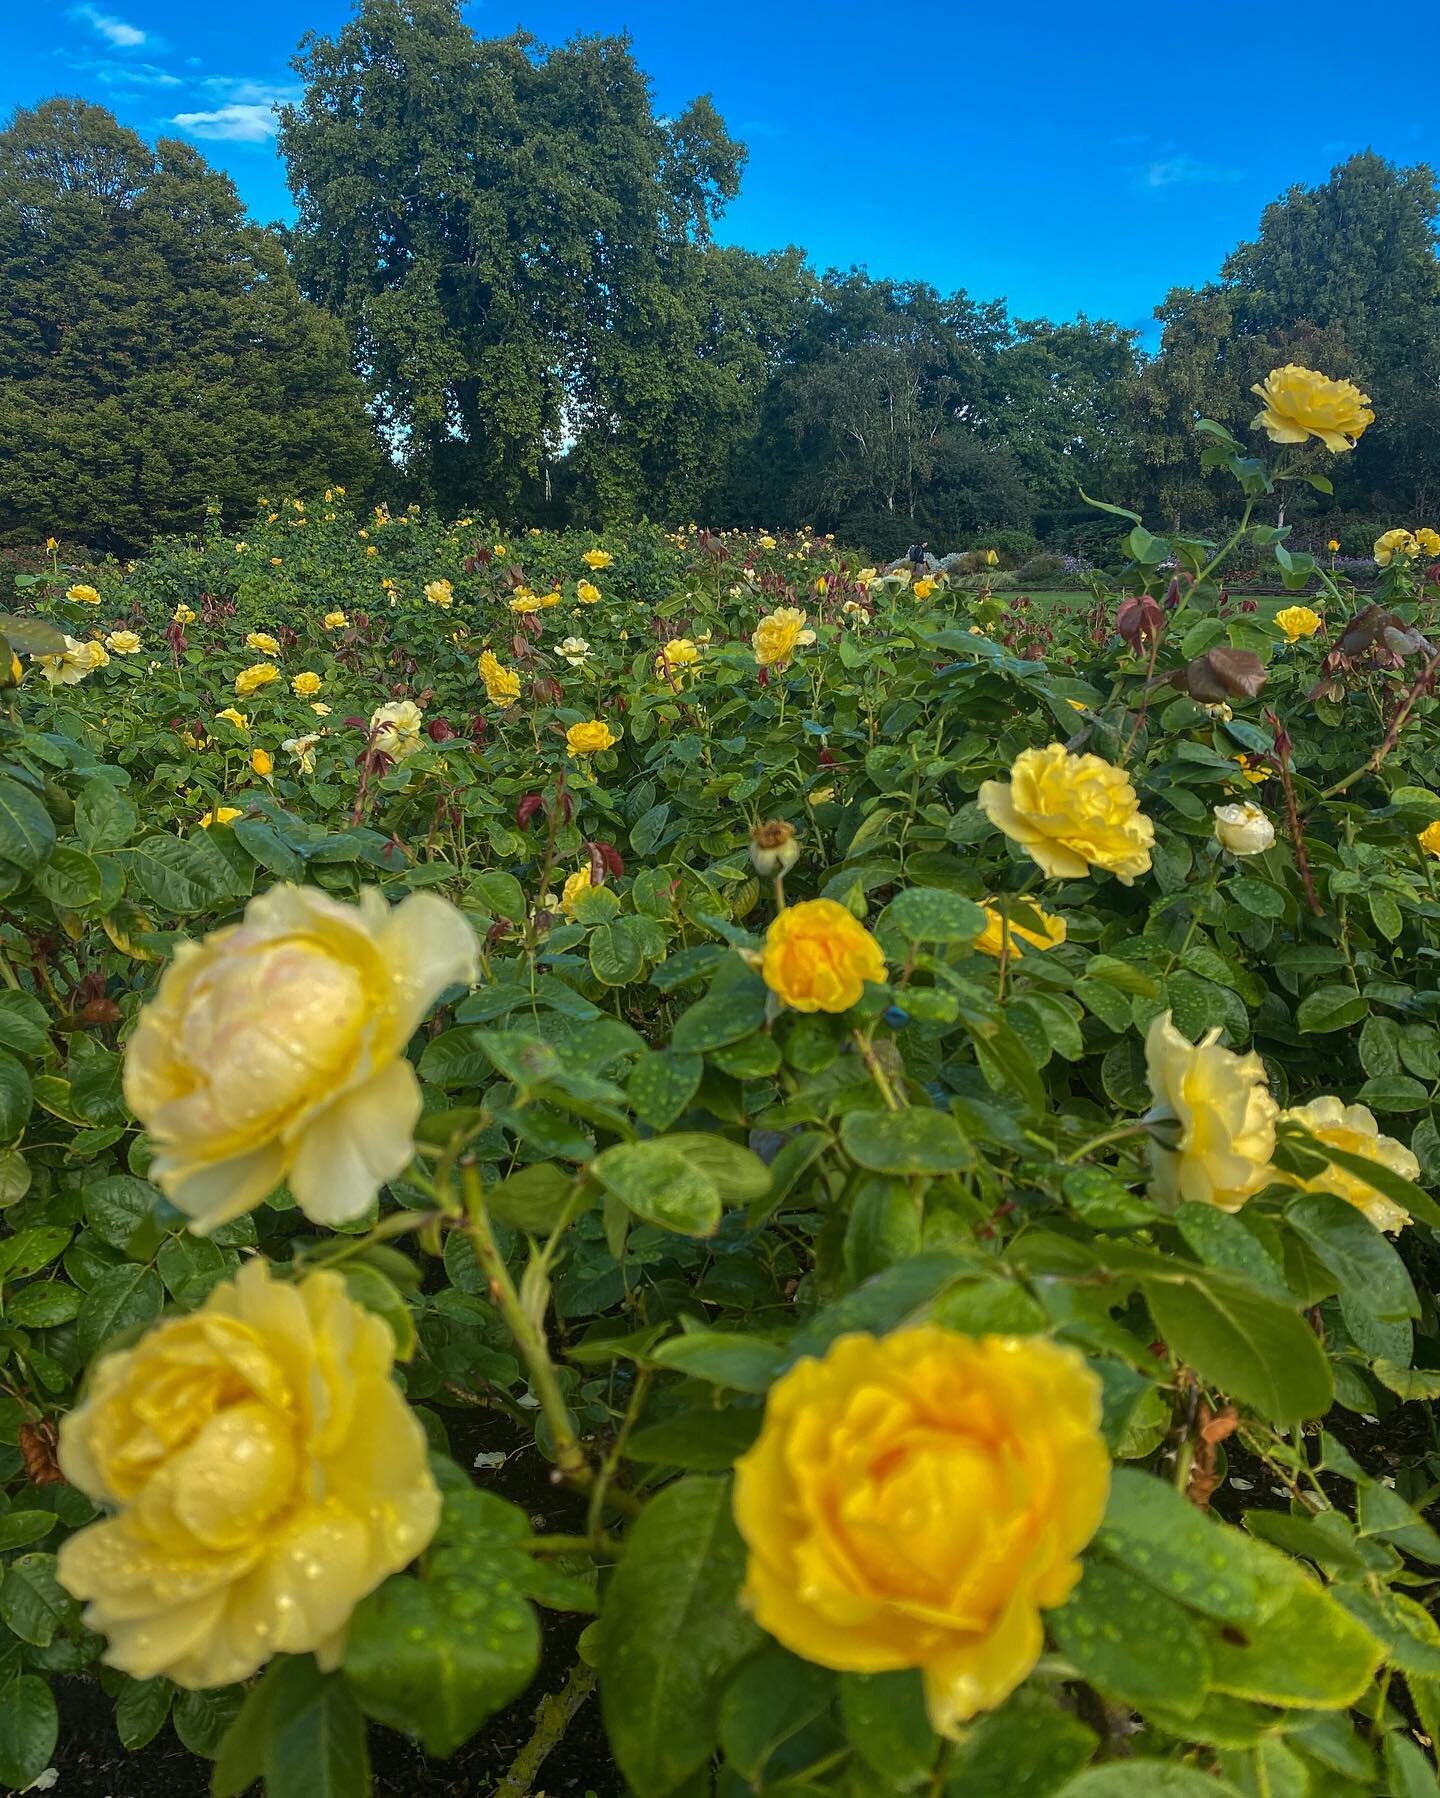 It&rsquo;s hard to believe that just 5 minutes up the road from here you&rsquo;ll be met with the chaotic sounds of blaring sirens and people rushing about.

When Central London used to be home for me, these rose gardens were my sanctuary. 

A place 